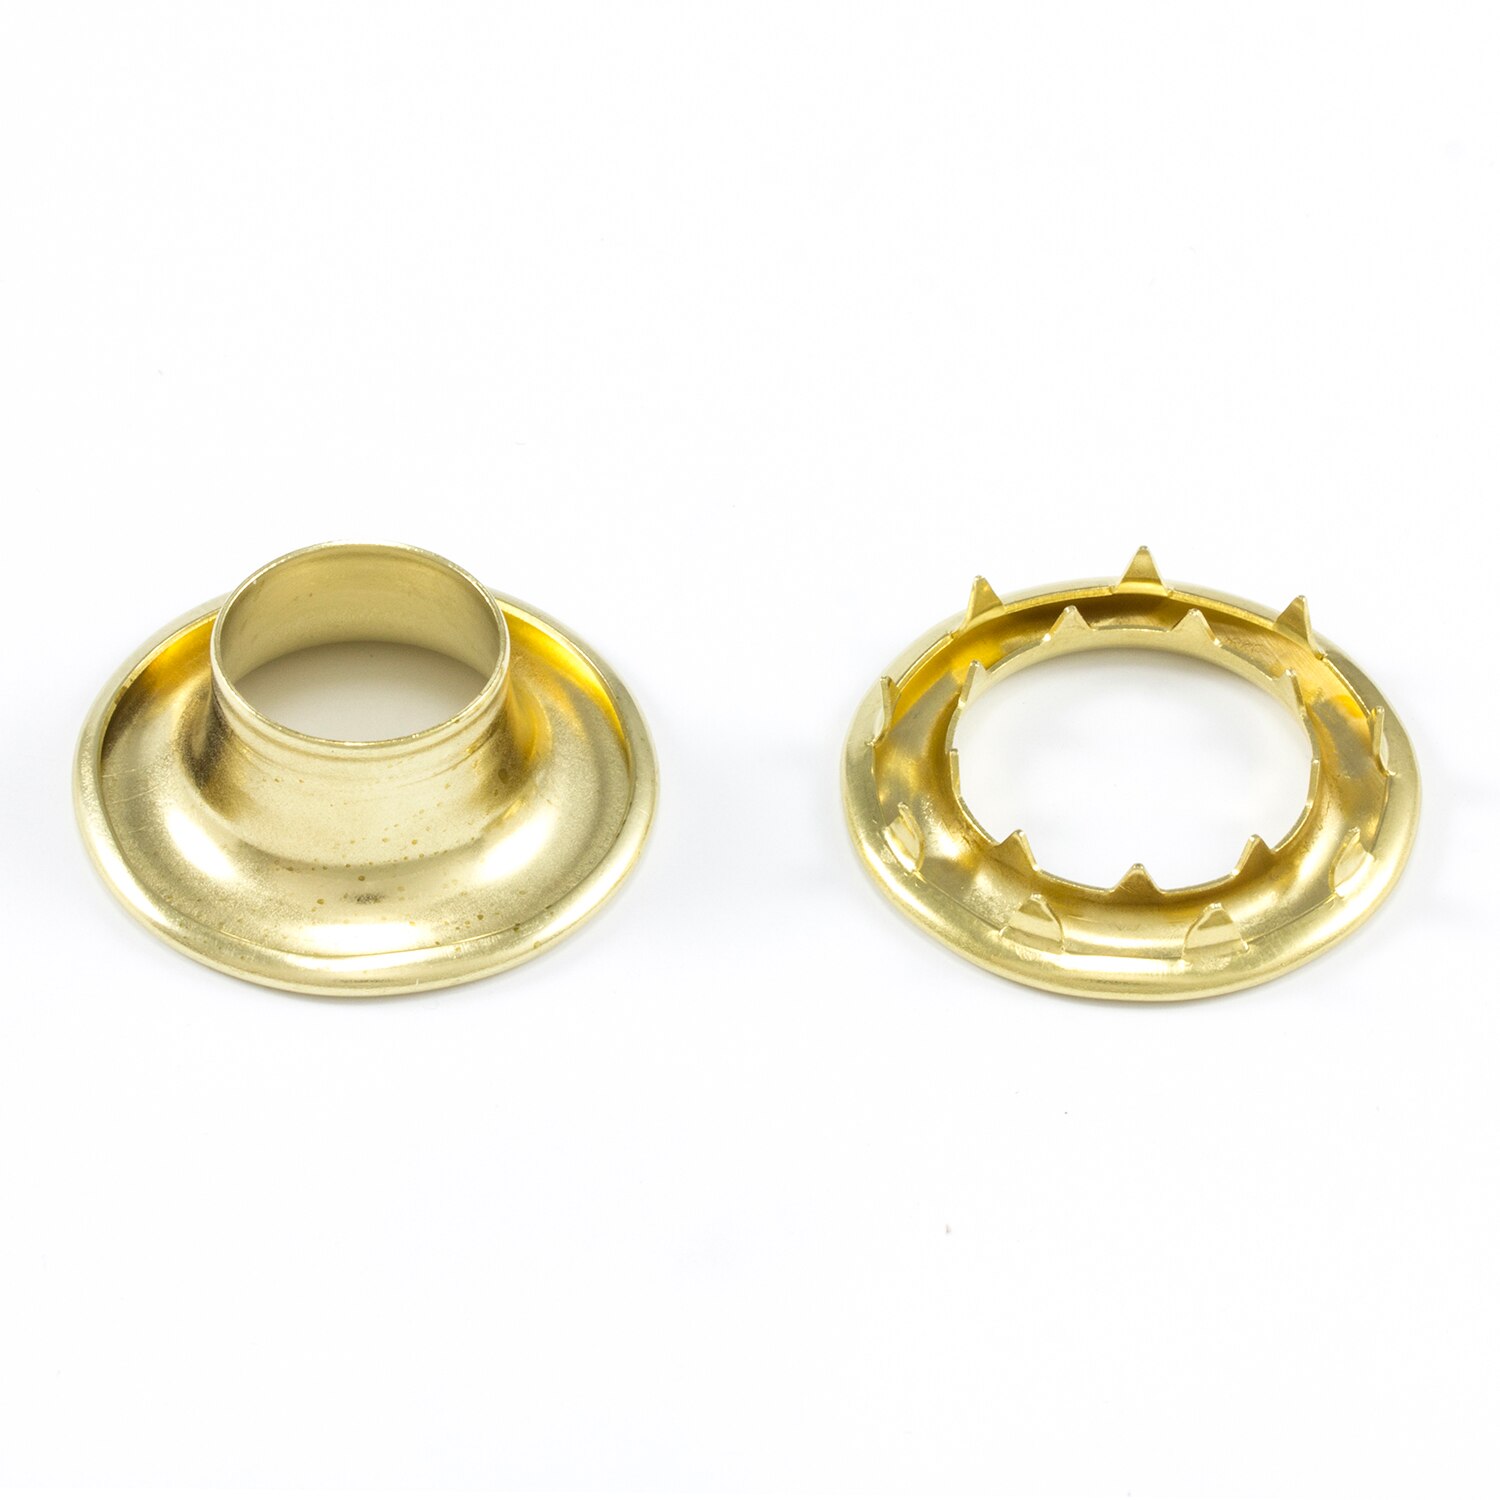 Brass Grommets with Plain Washer - Size #4